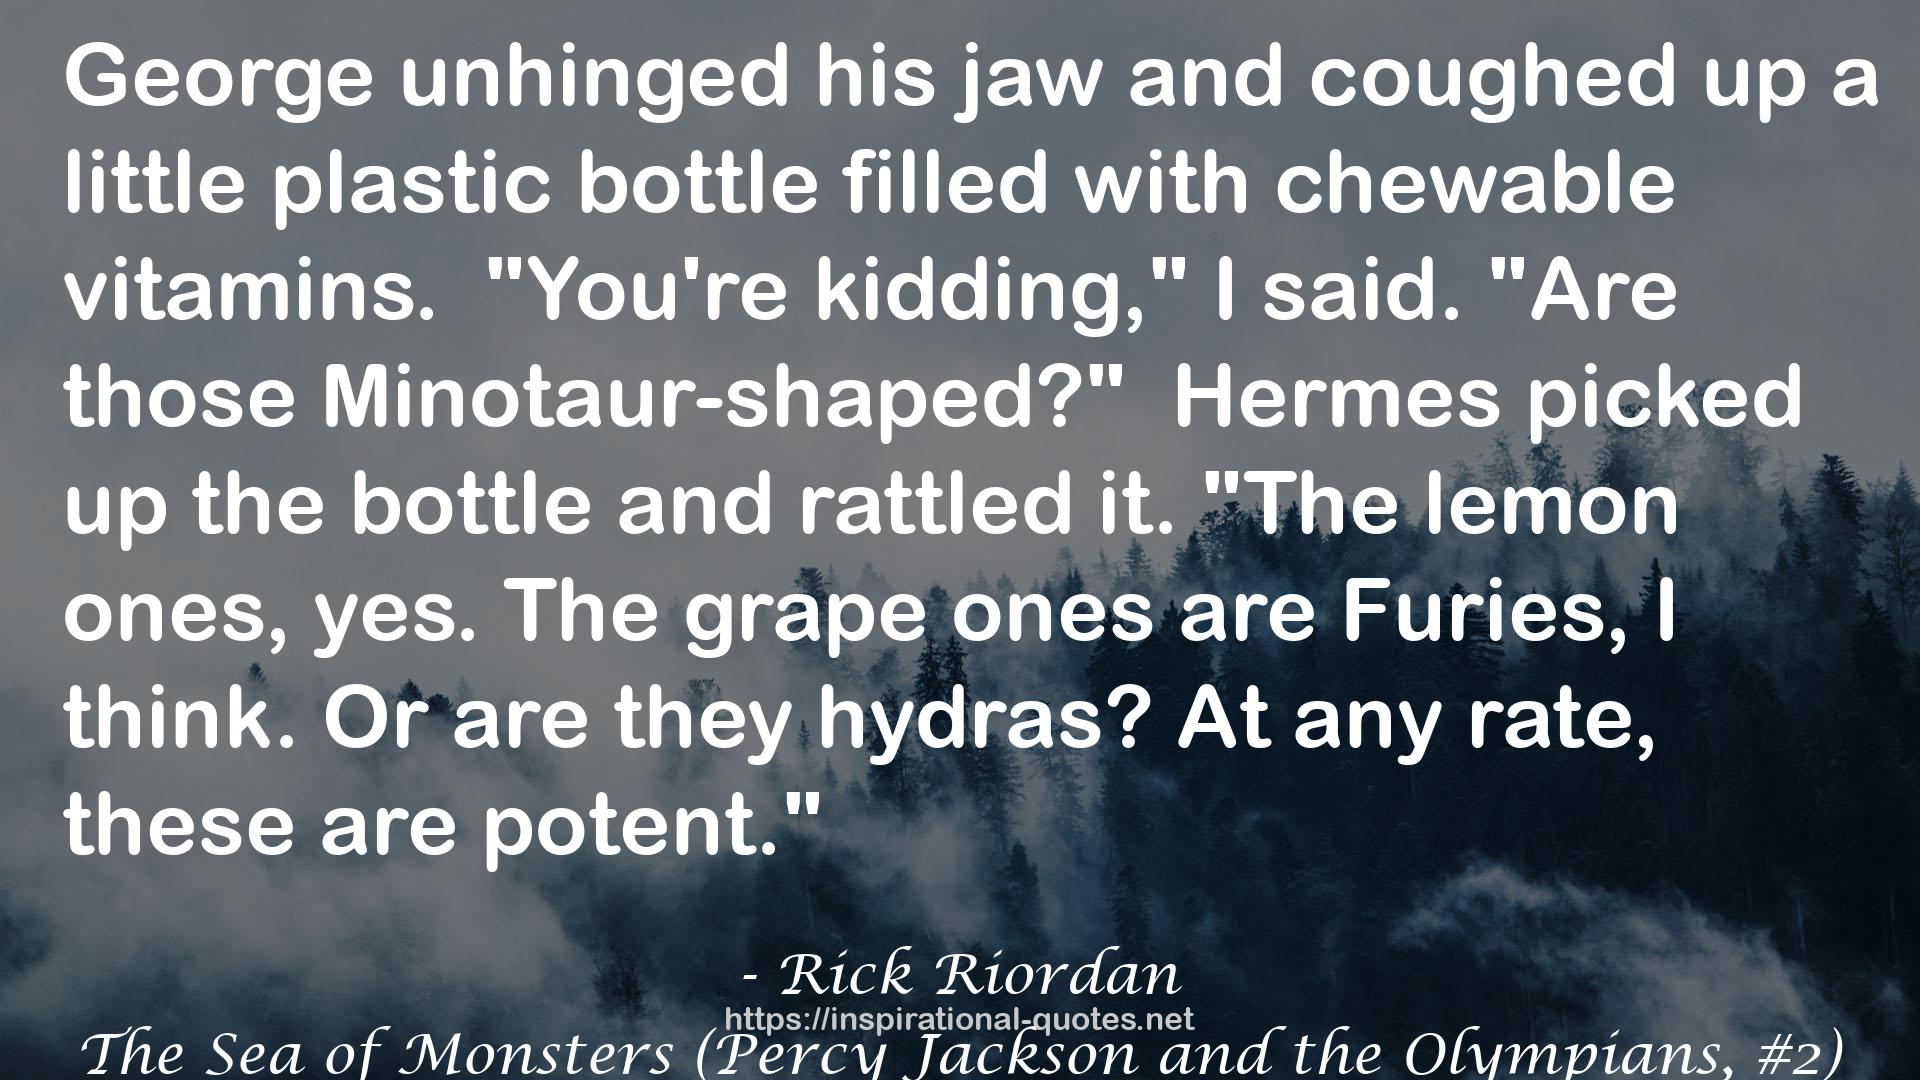 The Sea of Monsters (Percy Jackson and the Olympians, #2) QUOTES